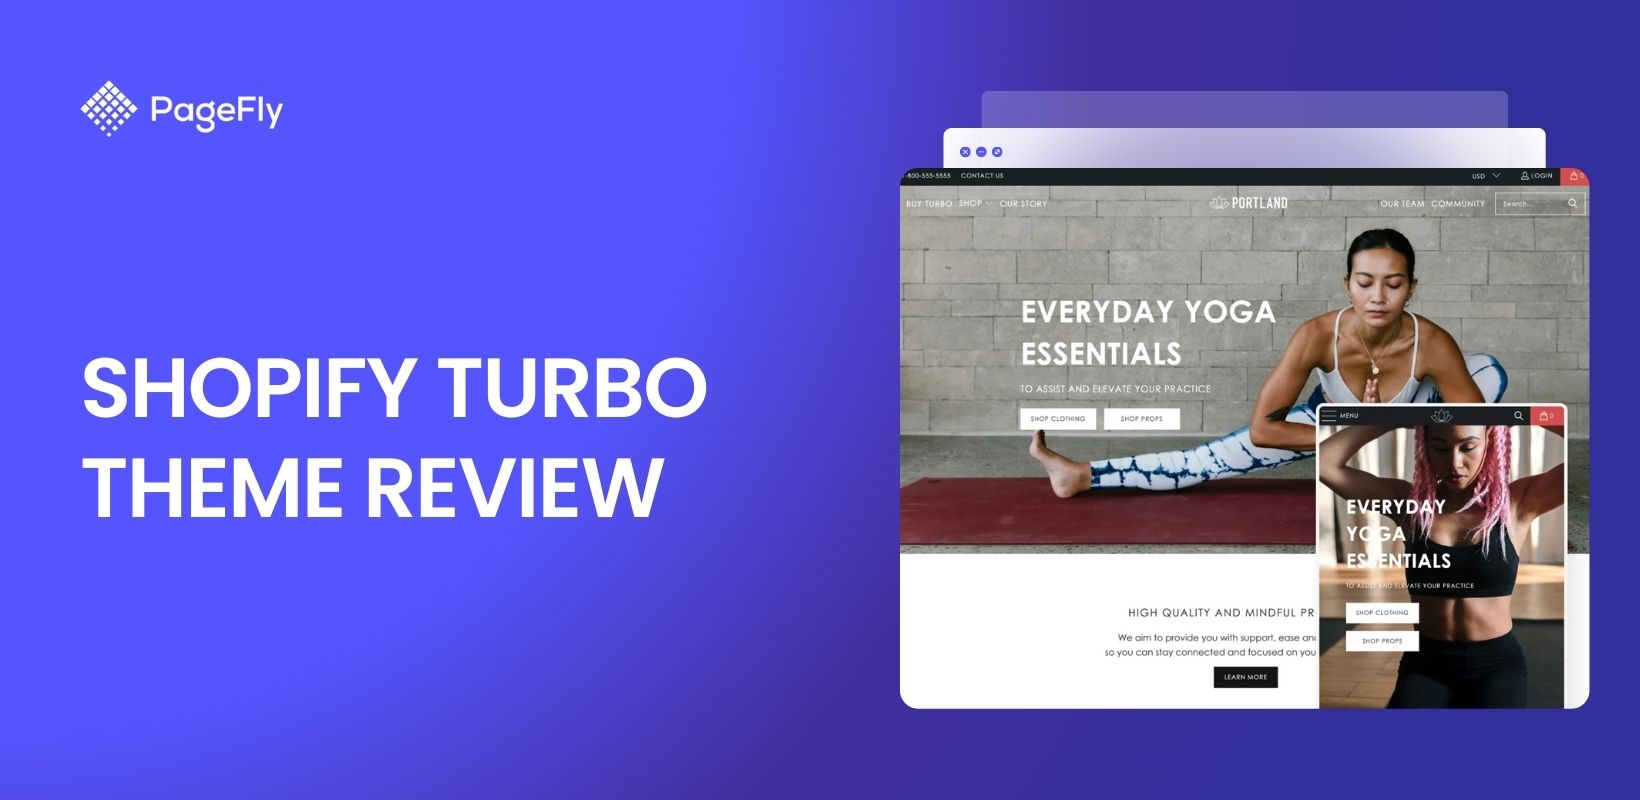 Shopify Turbo Theme Review: Which Is The Best Store Type For Turbo?